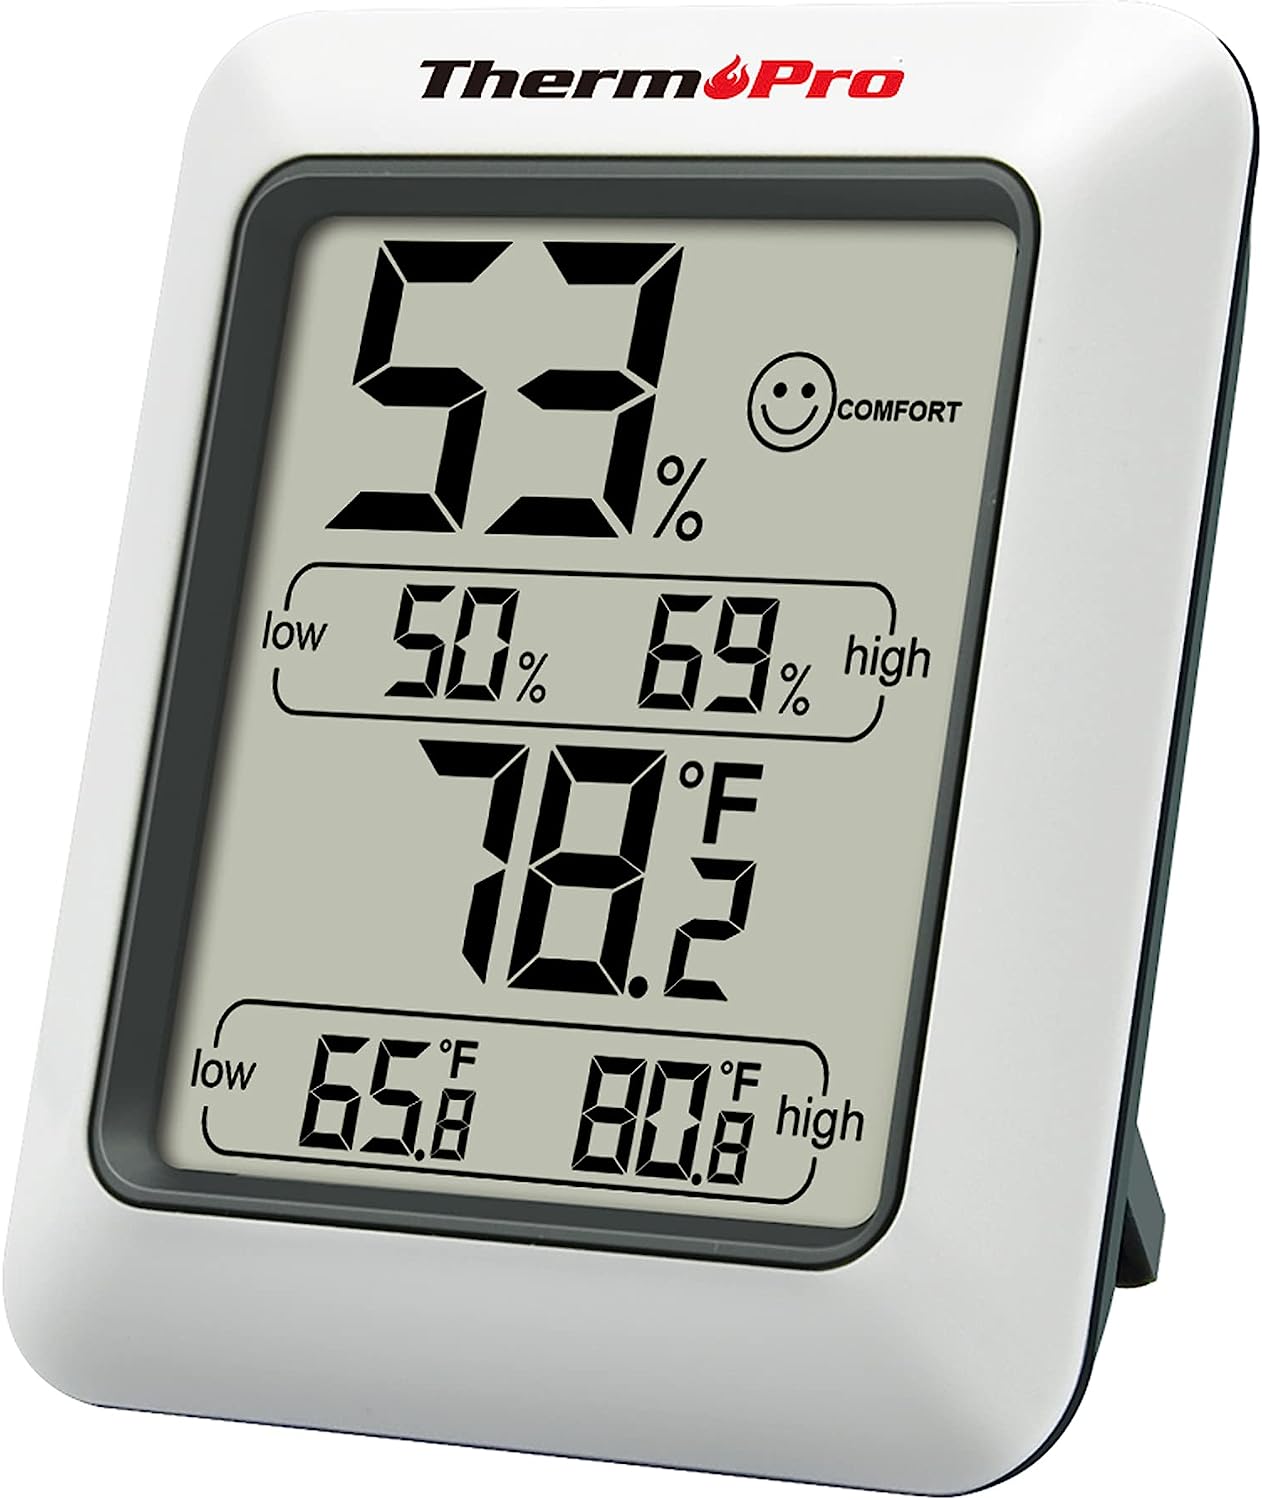 ThermoPro TP50 Digital Hygrometer Indoor Thermometer [...]